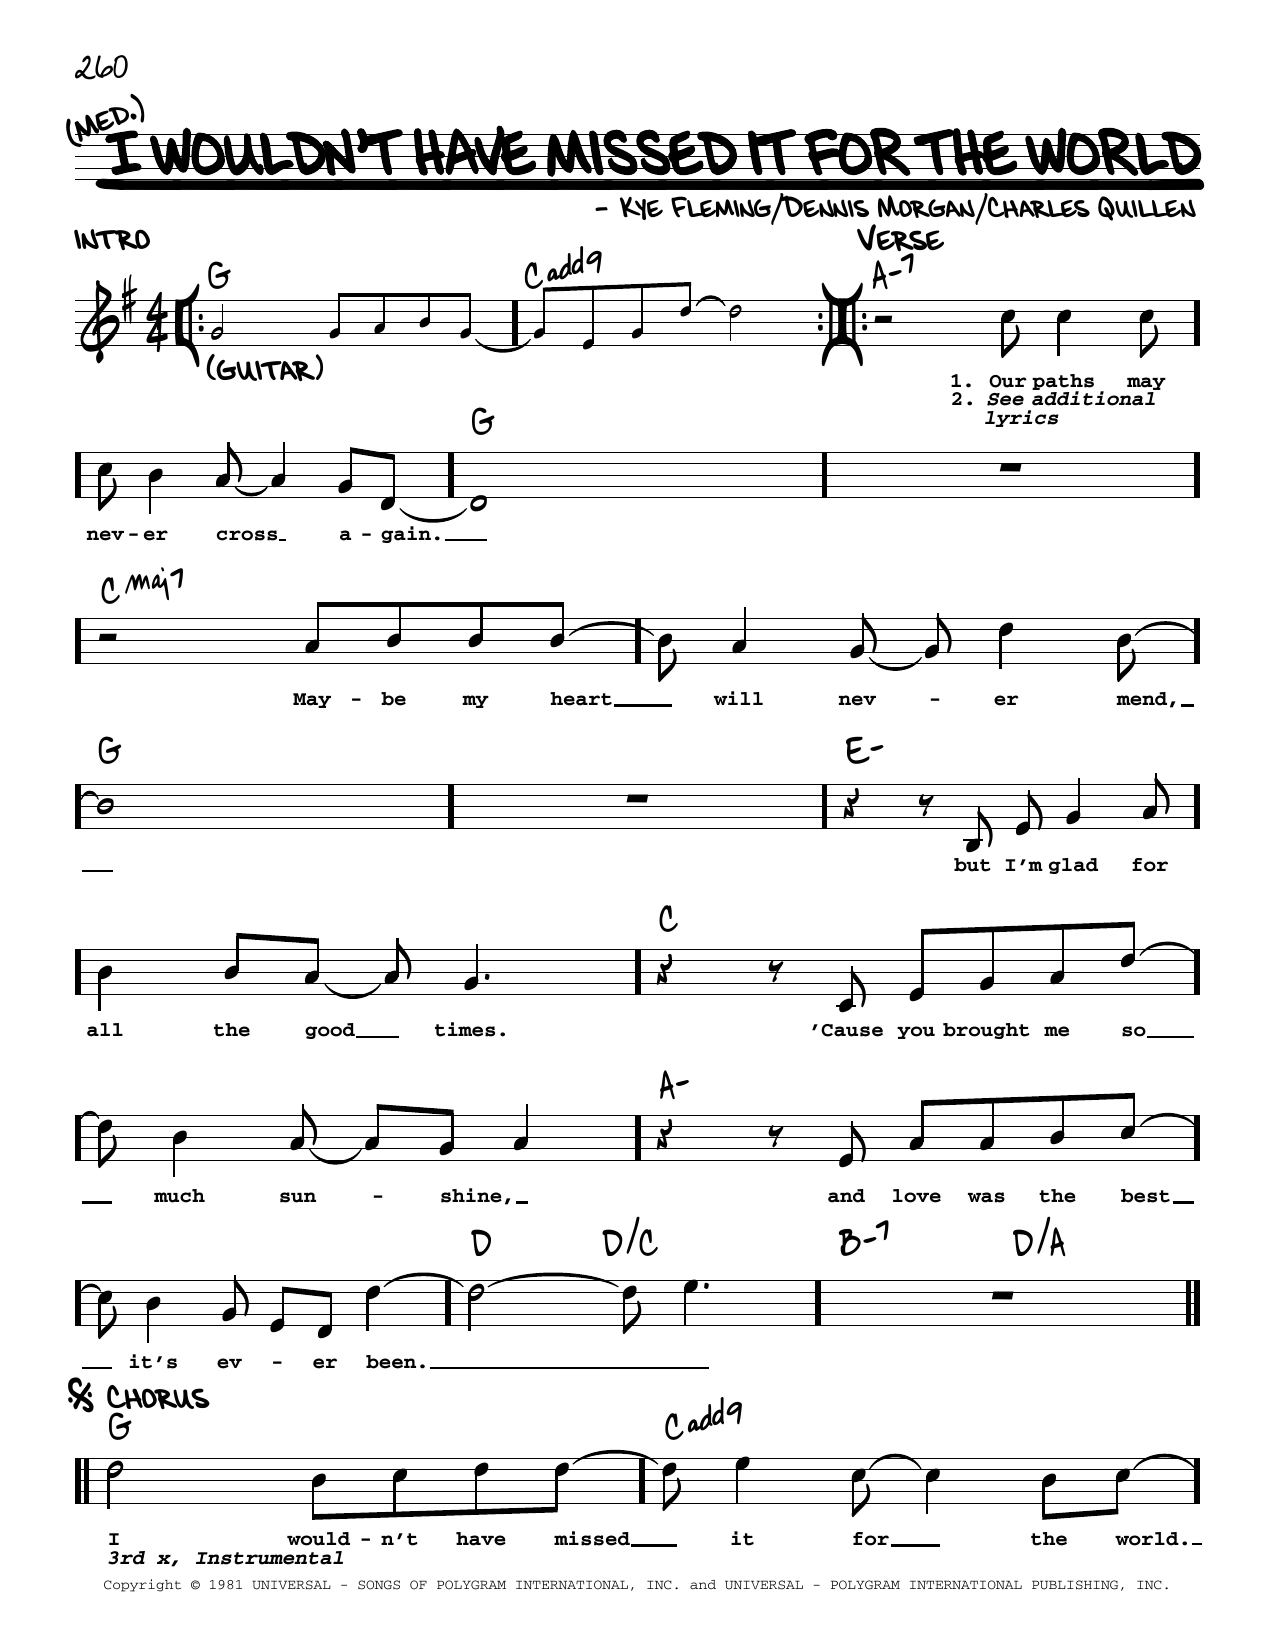 Download Ronnie Milsap I Wouldn't Have Missed It For The World Sheet Music